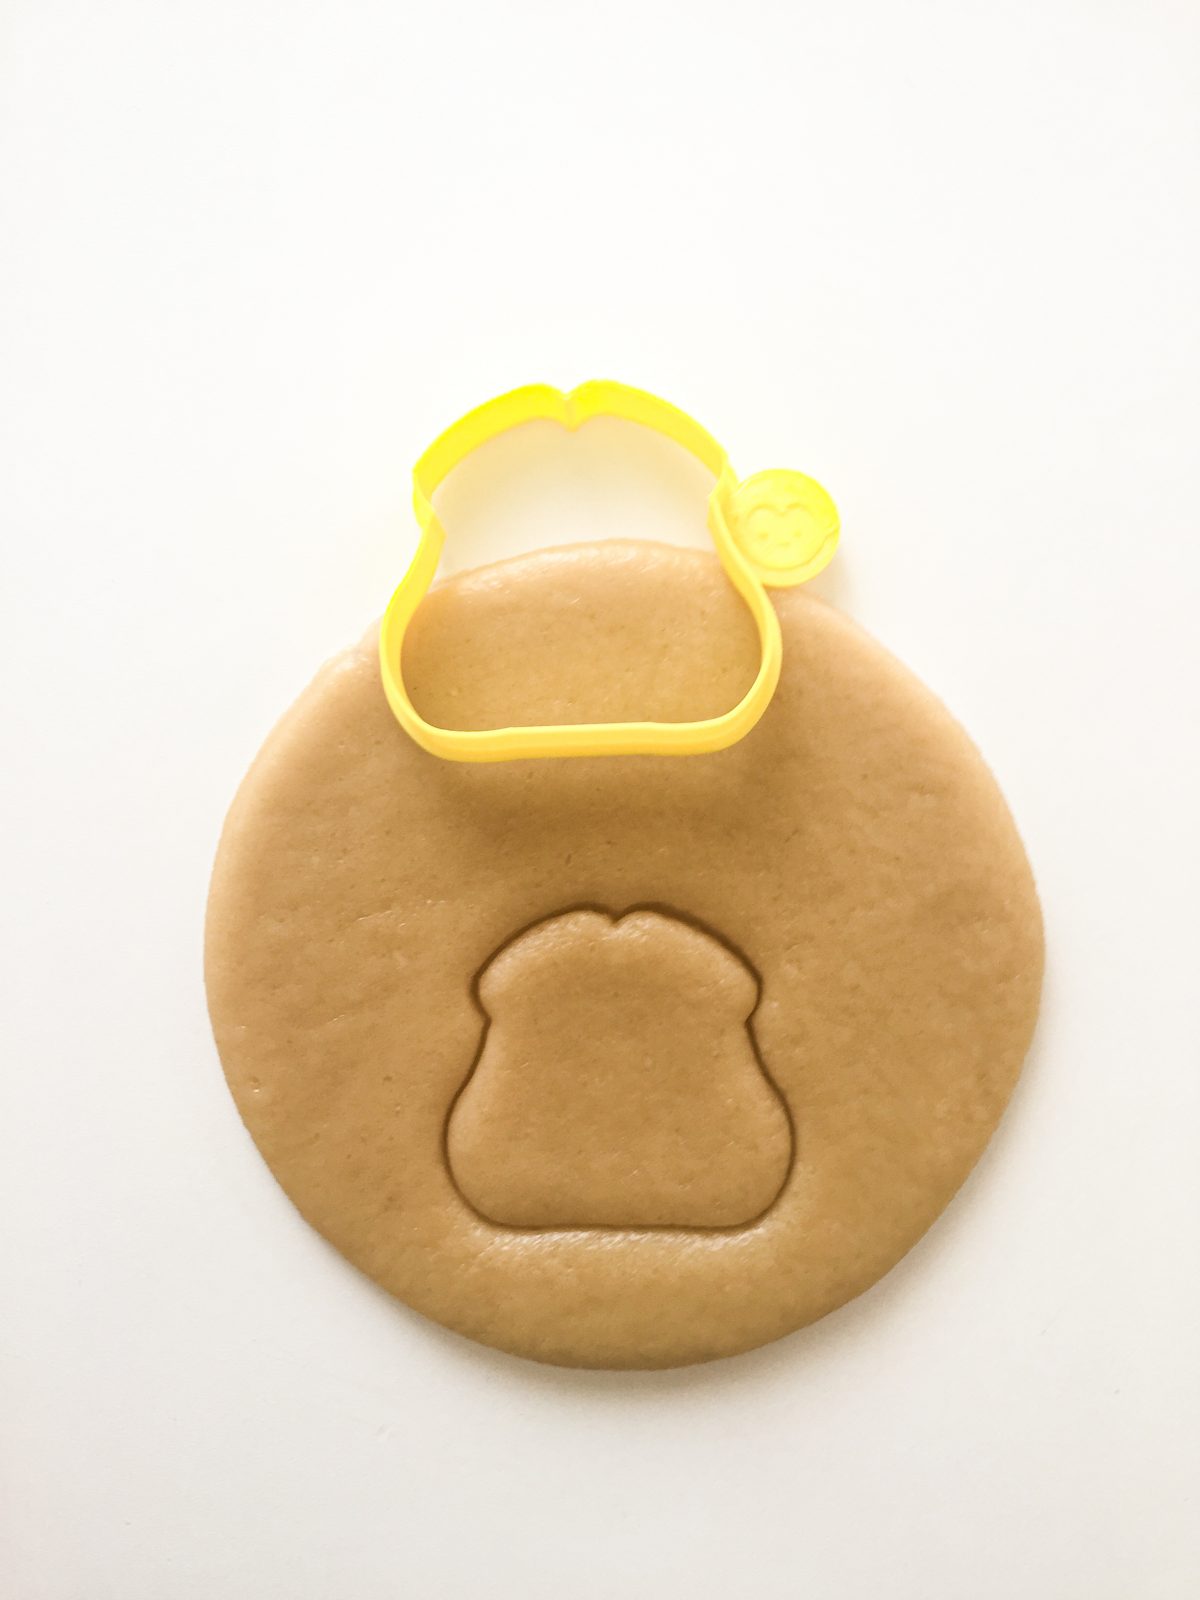 Pair of Pears Mini Cookie Cutter